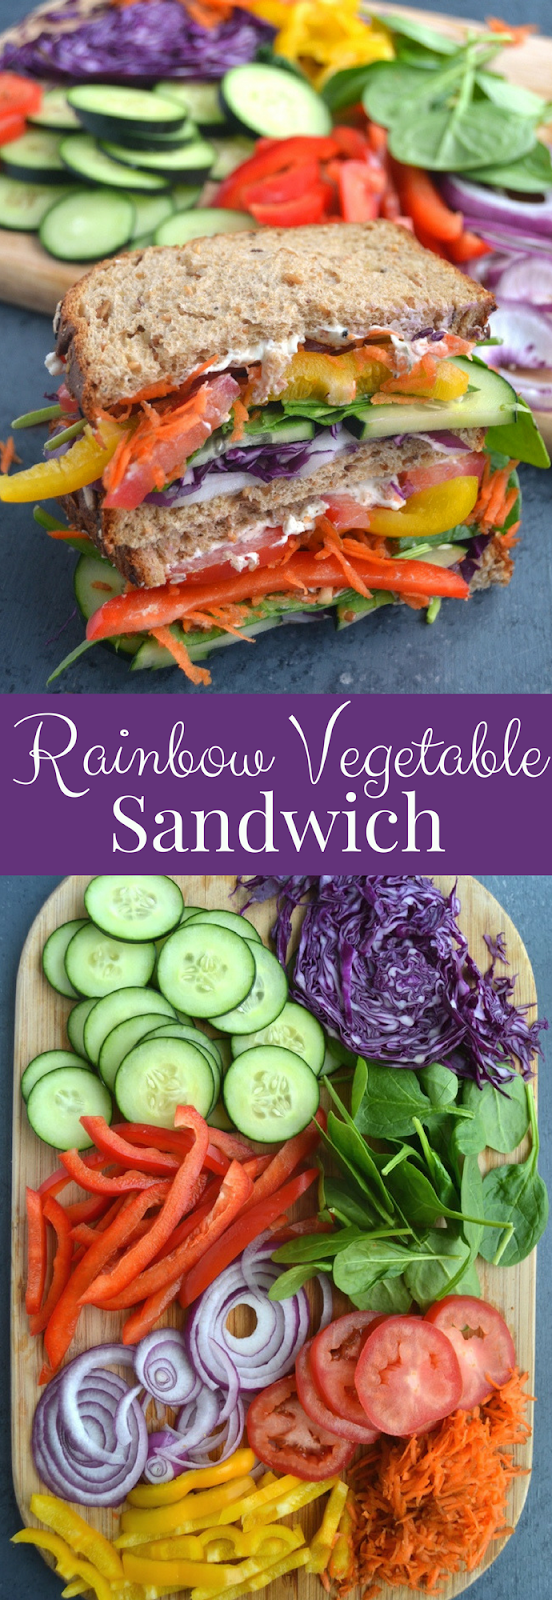 Rainbow Vegetable Sandwich makes the perfect lunch with a mix of rainbow vegetables and a ranch cream cheese spread all on whole-grain bread! www.nutritionistreviews.com